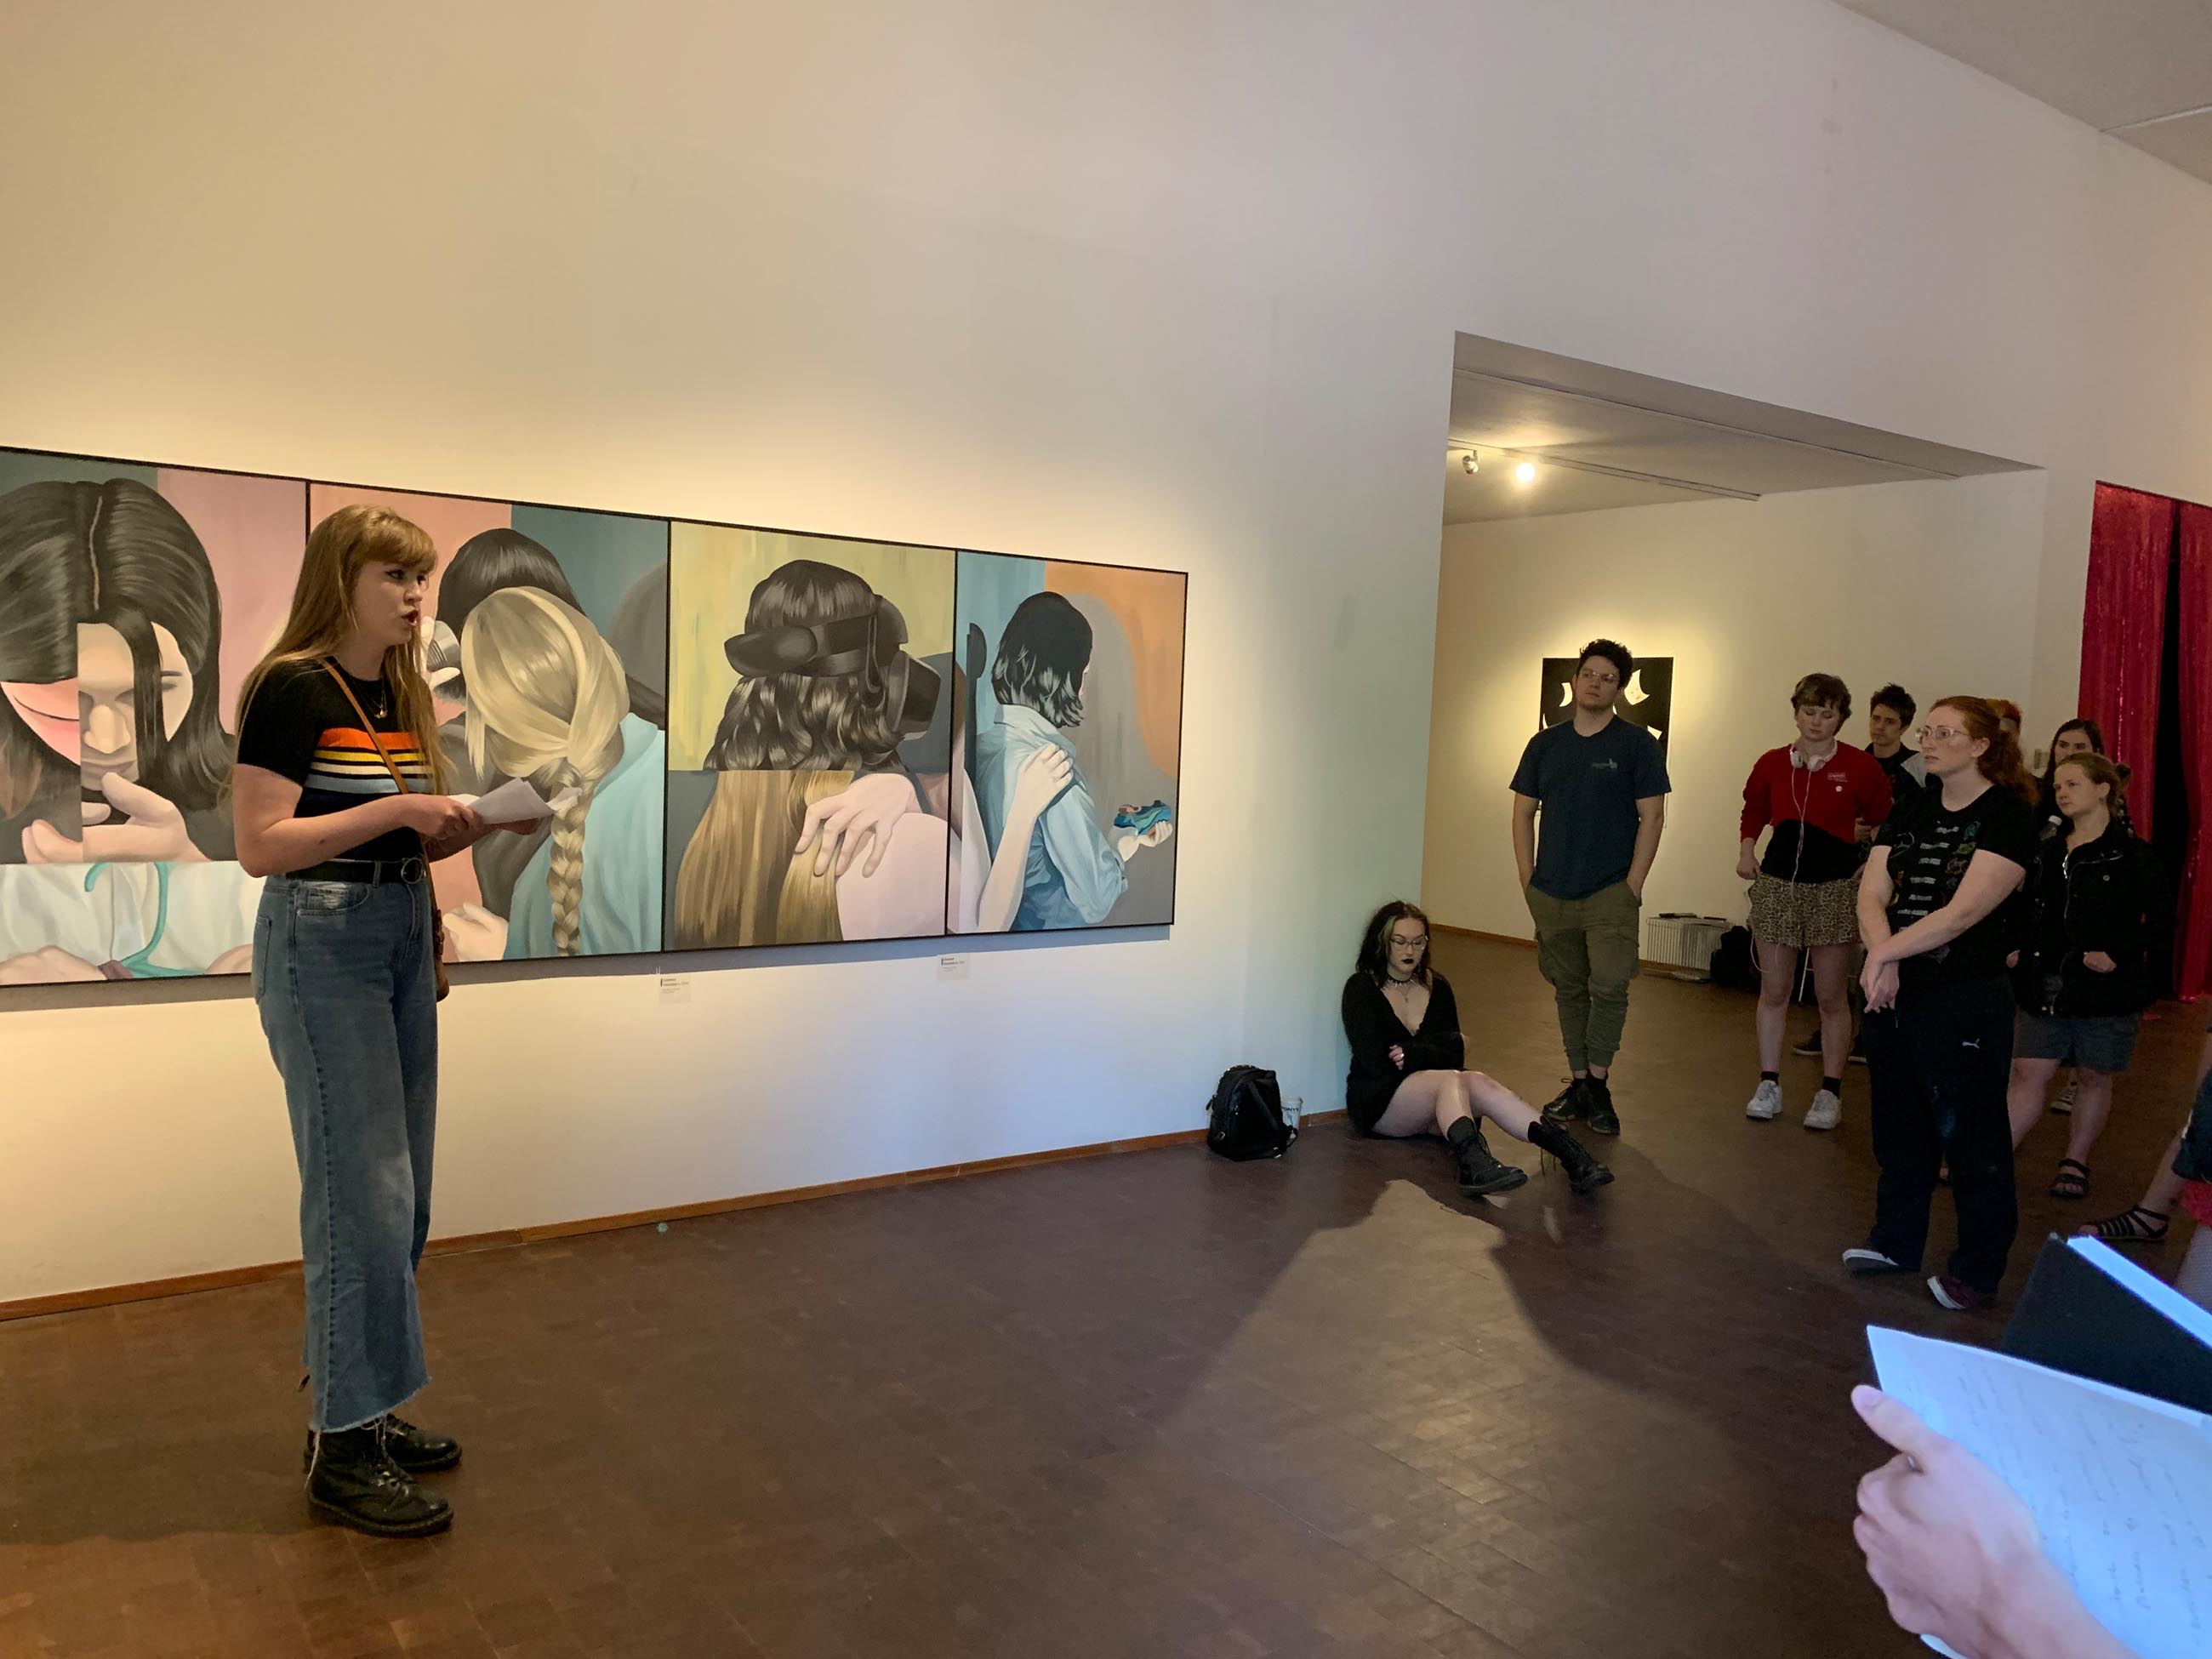 a painting student stands in front of a painting on a wall and speaks to a small group